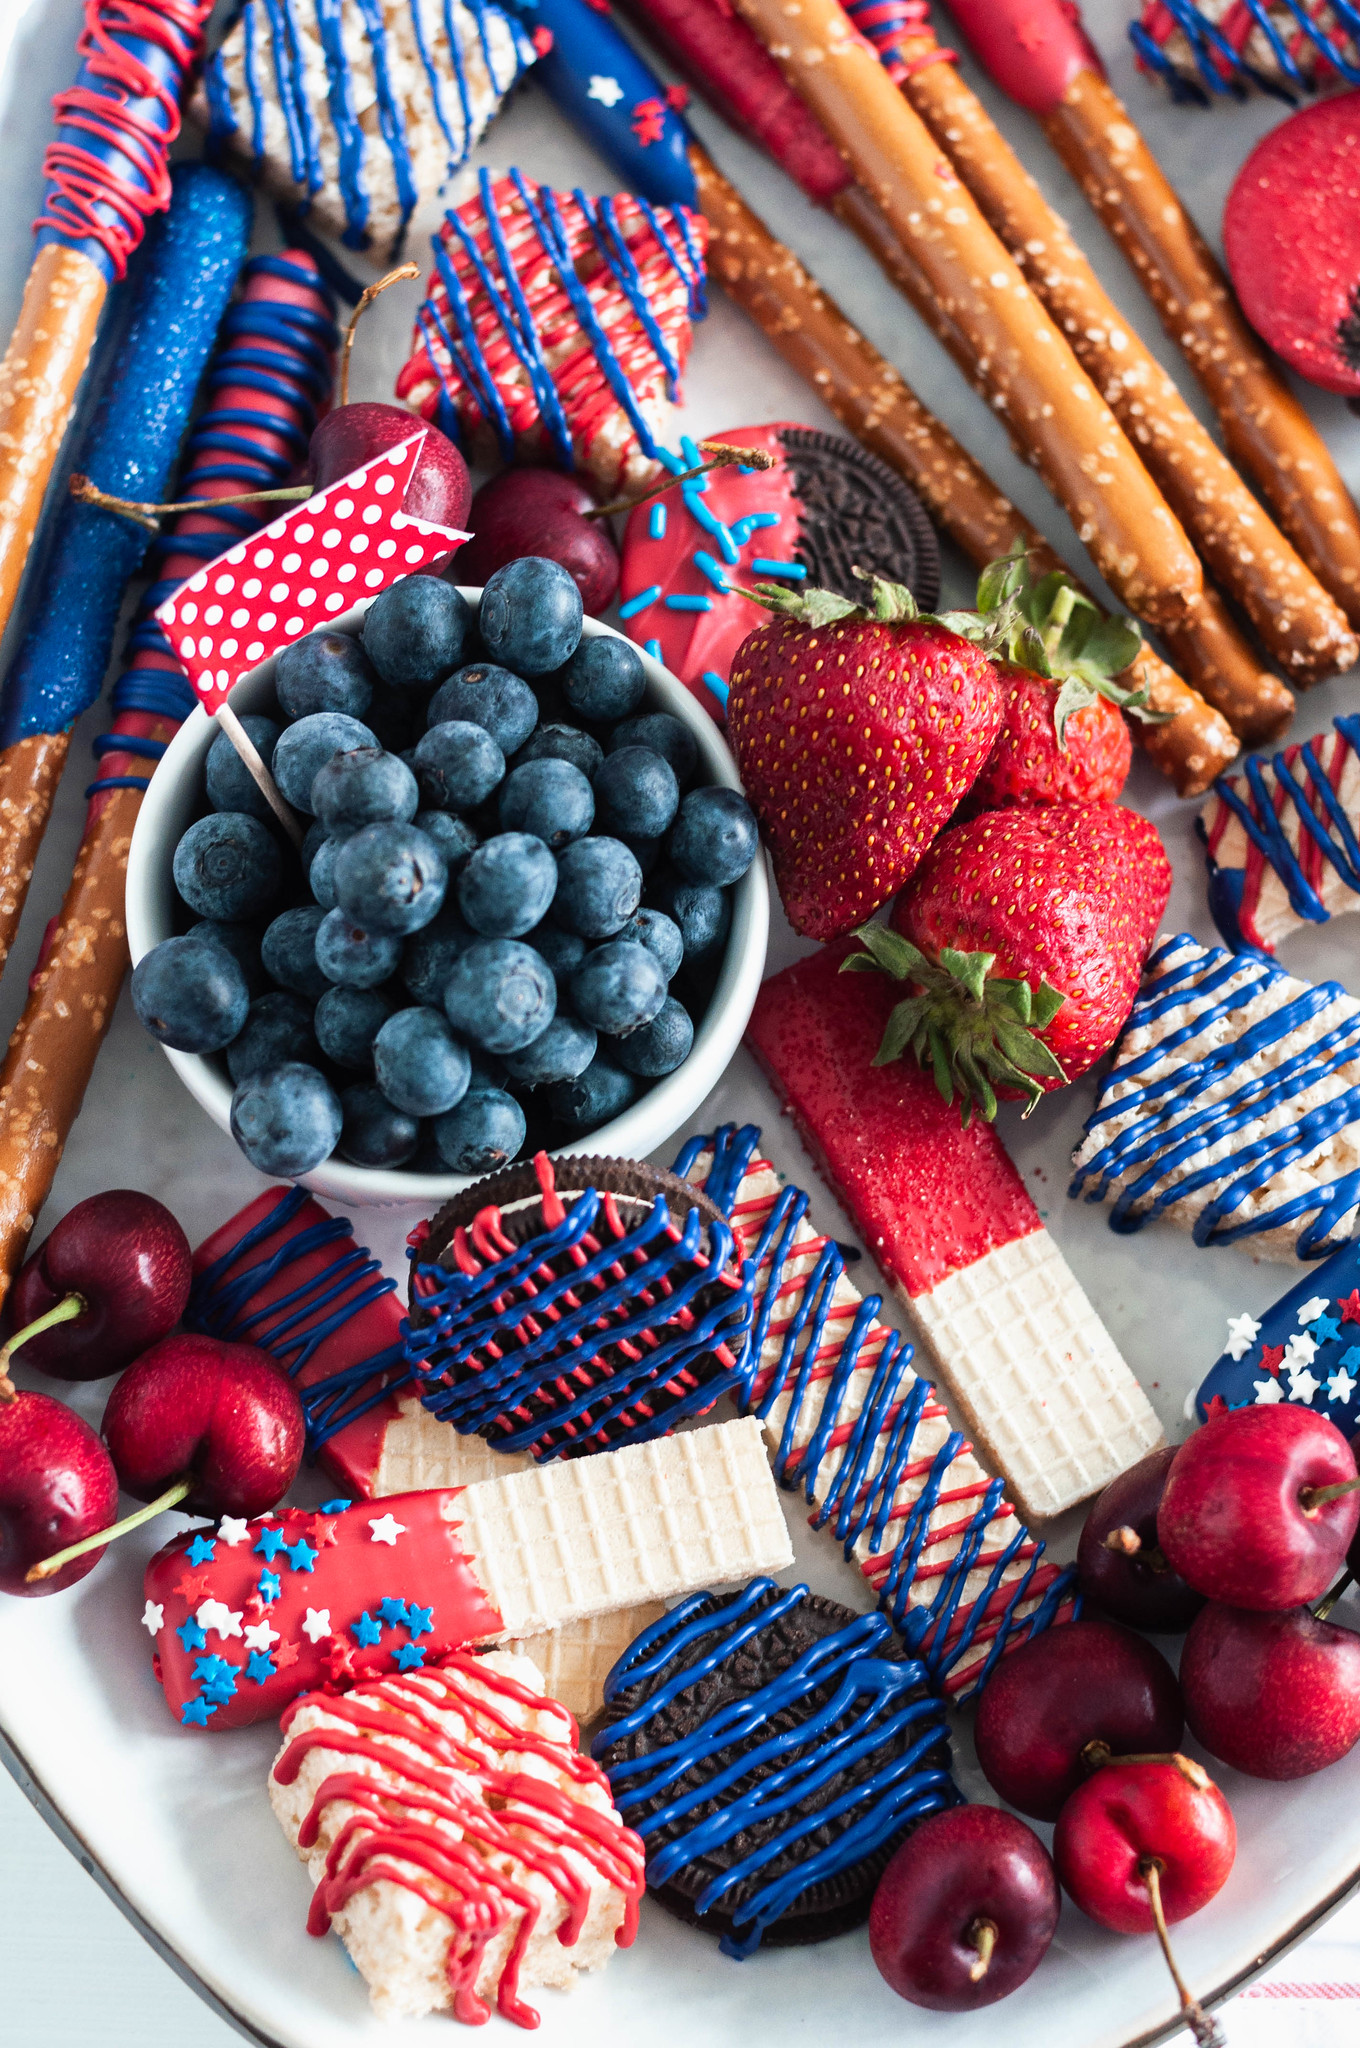 You'll be the hit of the 4th of July party when you show up with this Red White and Blue Dessert Board. Super simple to make with store-bought ingredients, some time and all your creative juices.